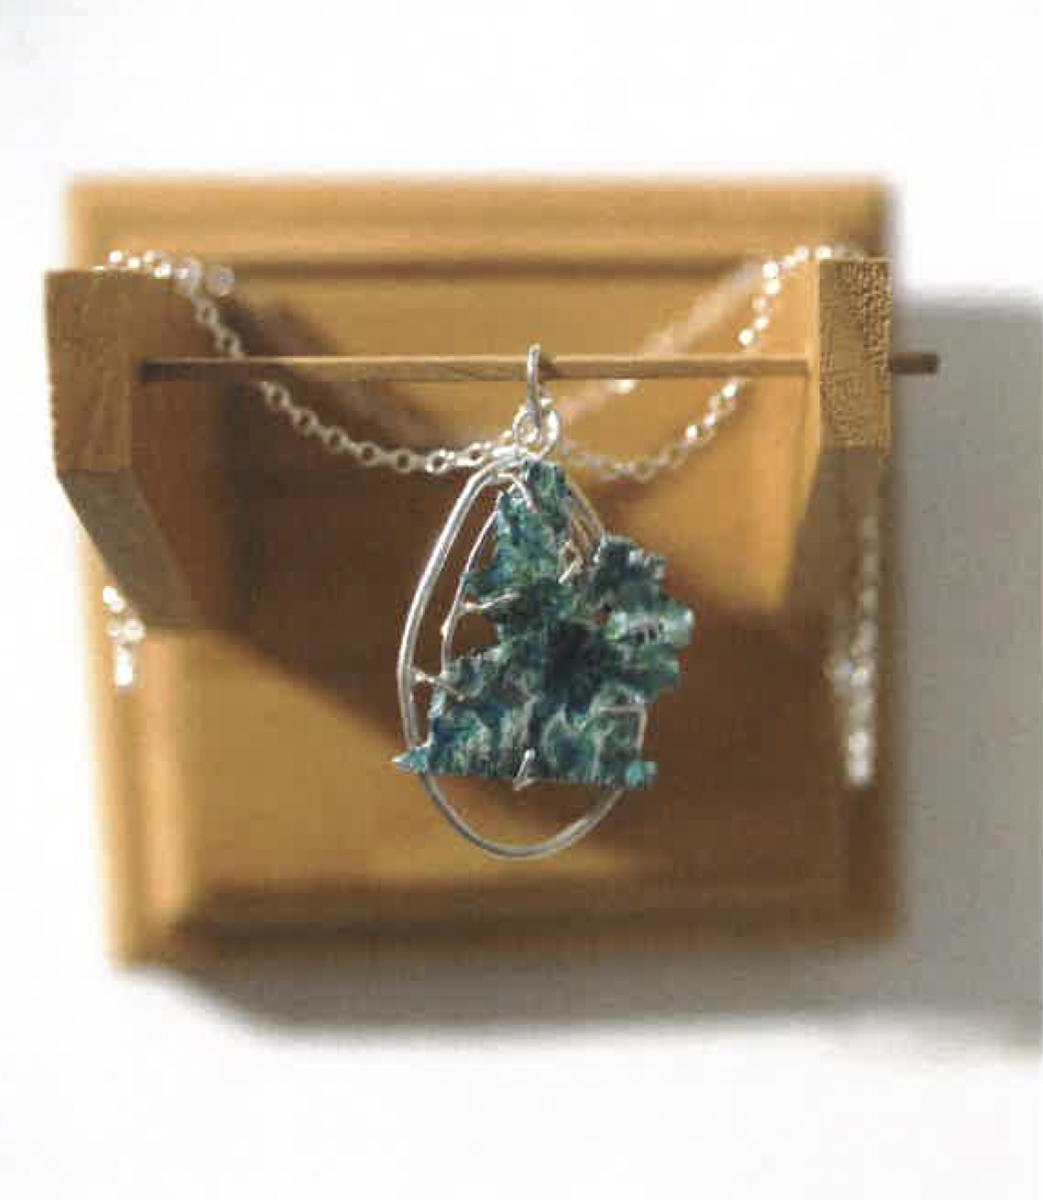 Delicate green enamel pendant resembling topography on a silver chain. Image courtesy of Naomi Hutchquist